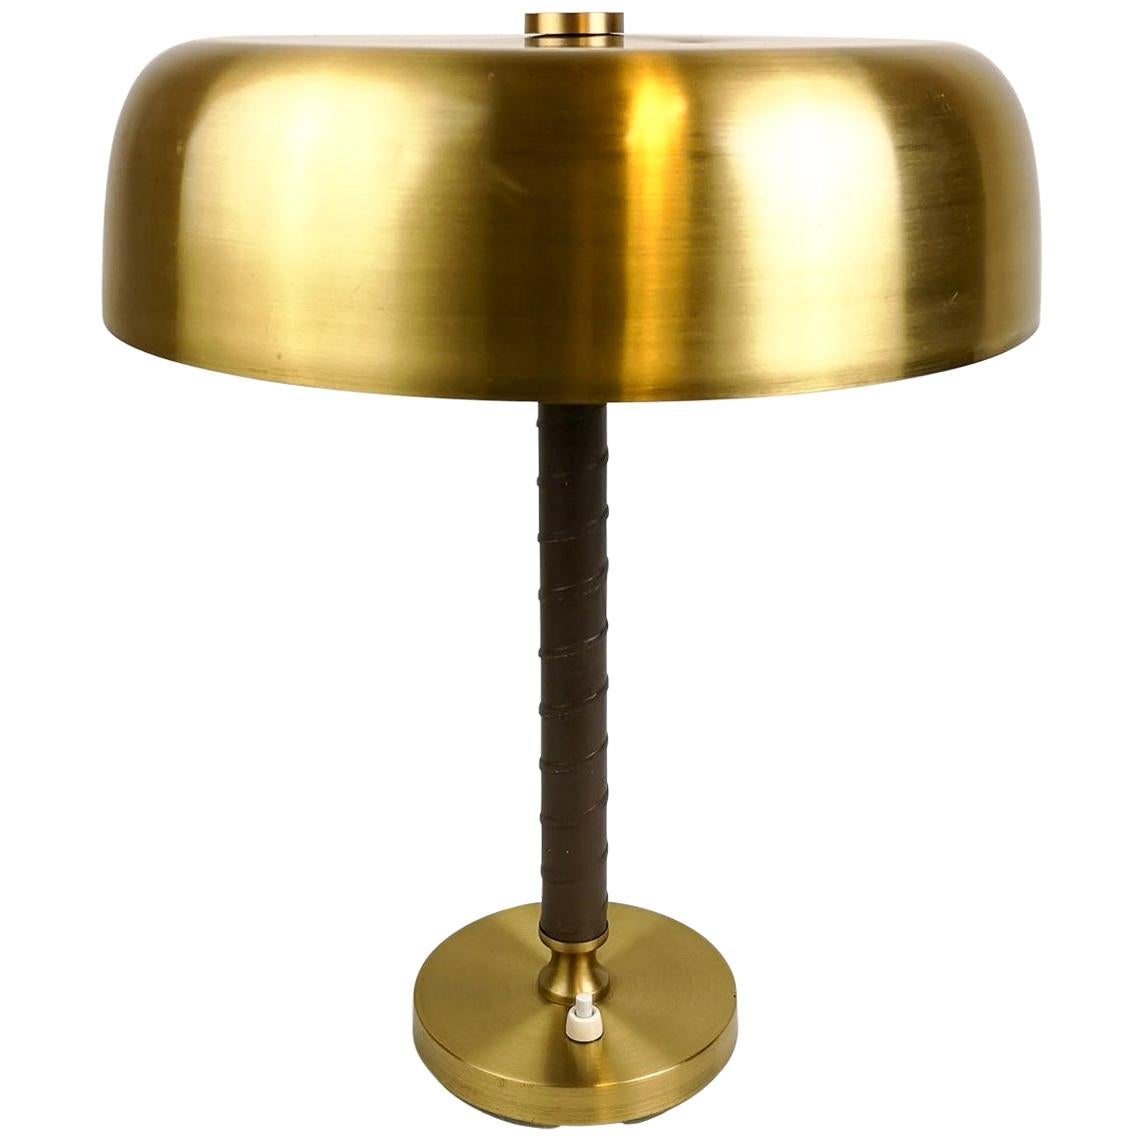 Swedish Midcentury Table Lamp in Brass and Leather by Boréns